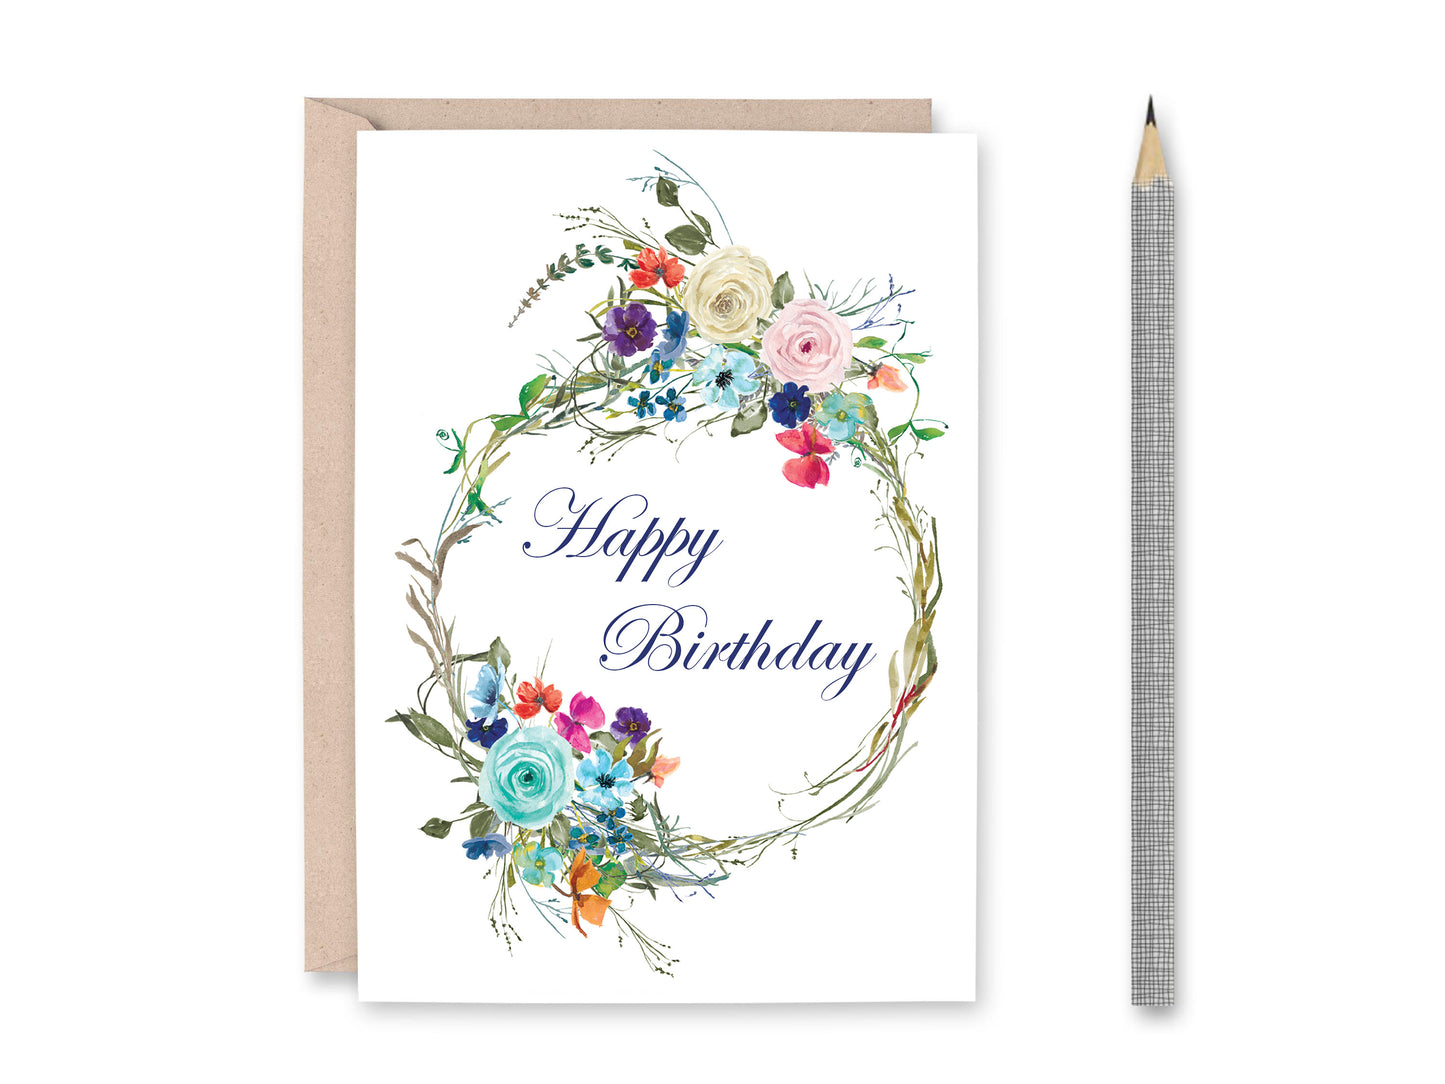 Watercolor Floral Card Set, Pretty Floral Cards, Birthday Card, Thank You Card, Sympathy Card, Thinking of you, Digital Download